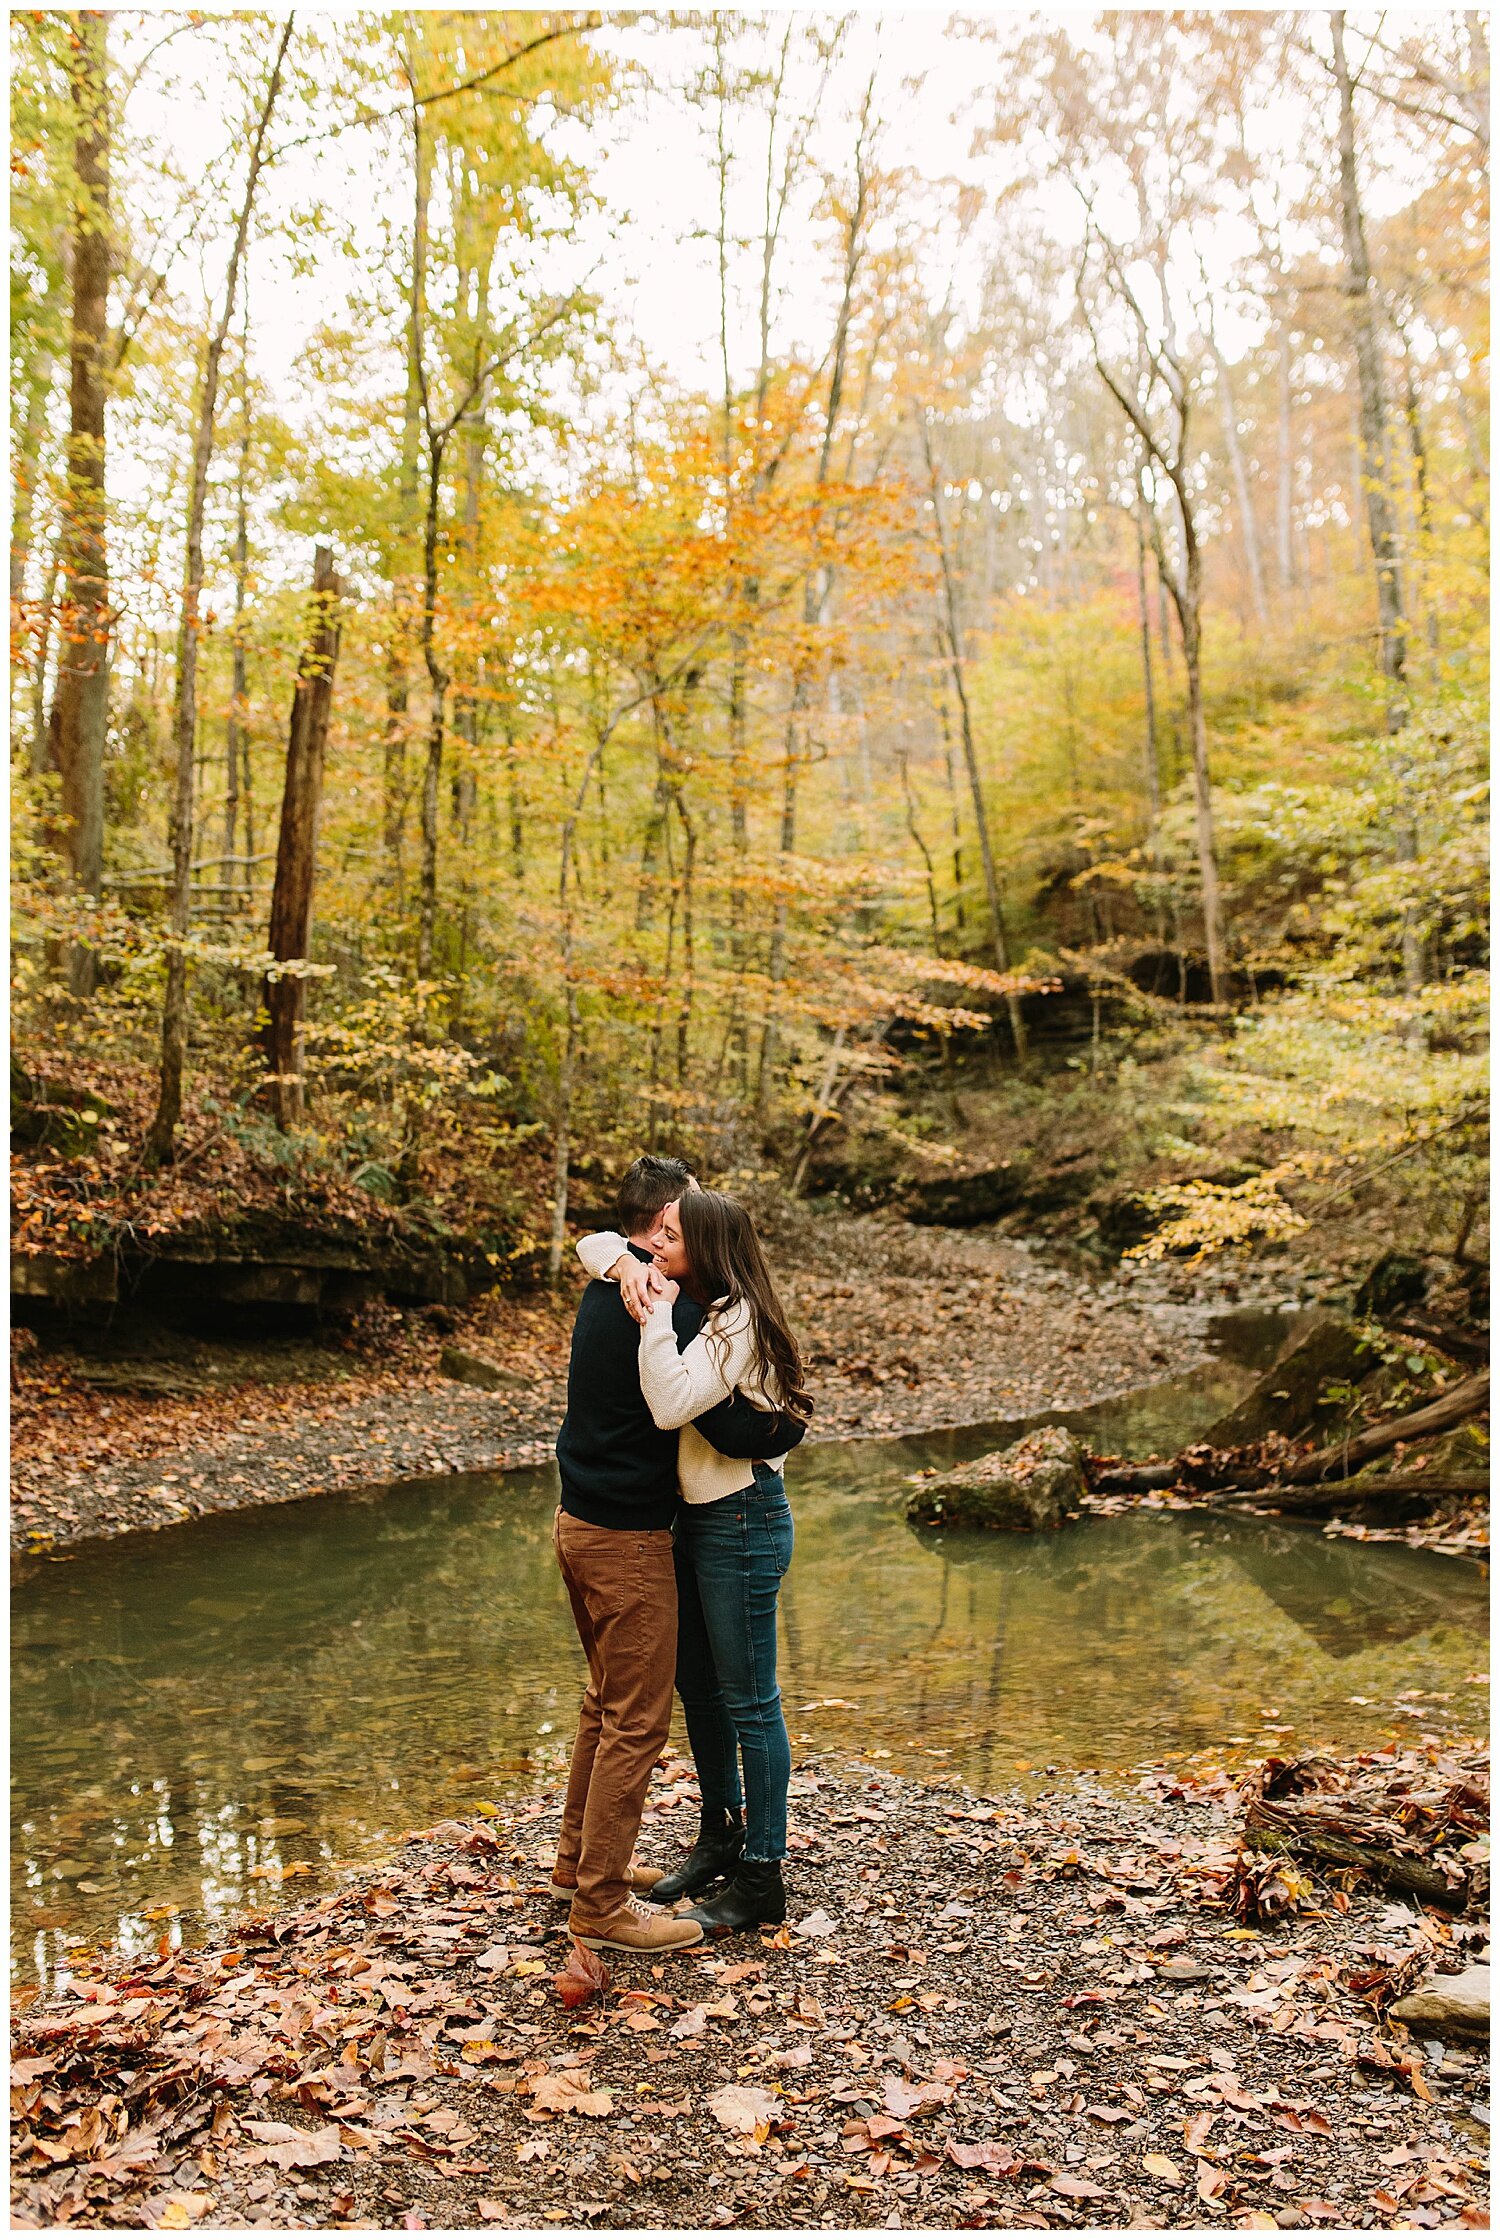 trent.and.kendra.photography.bernheim.engagement.session-10.jpg